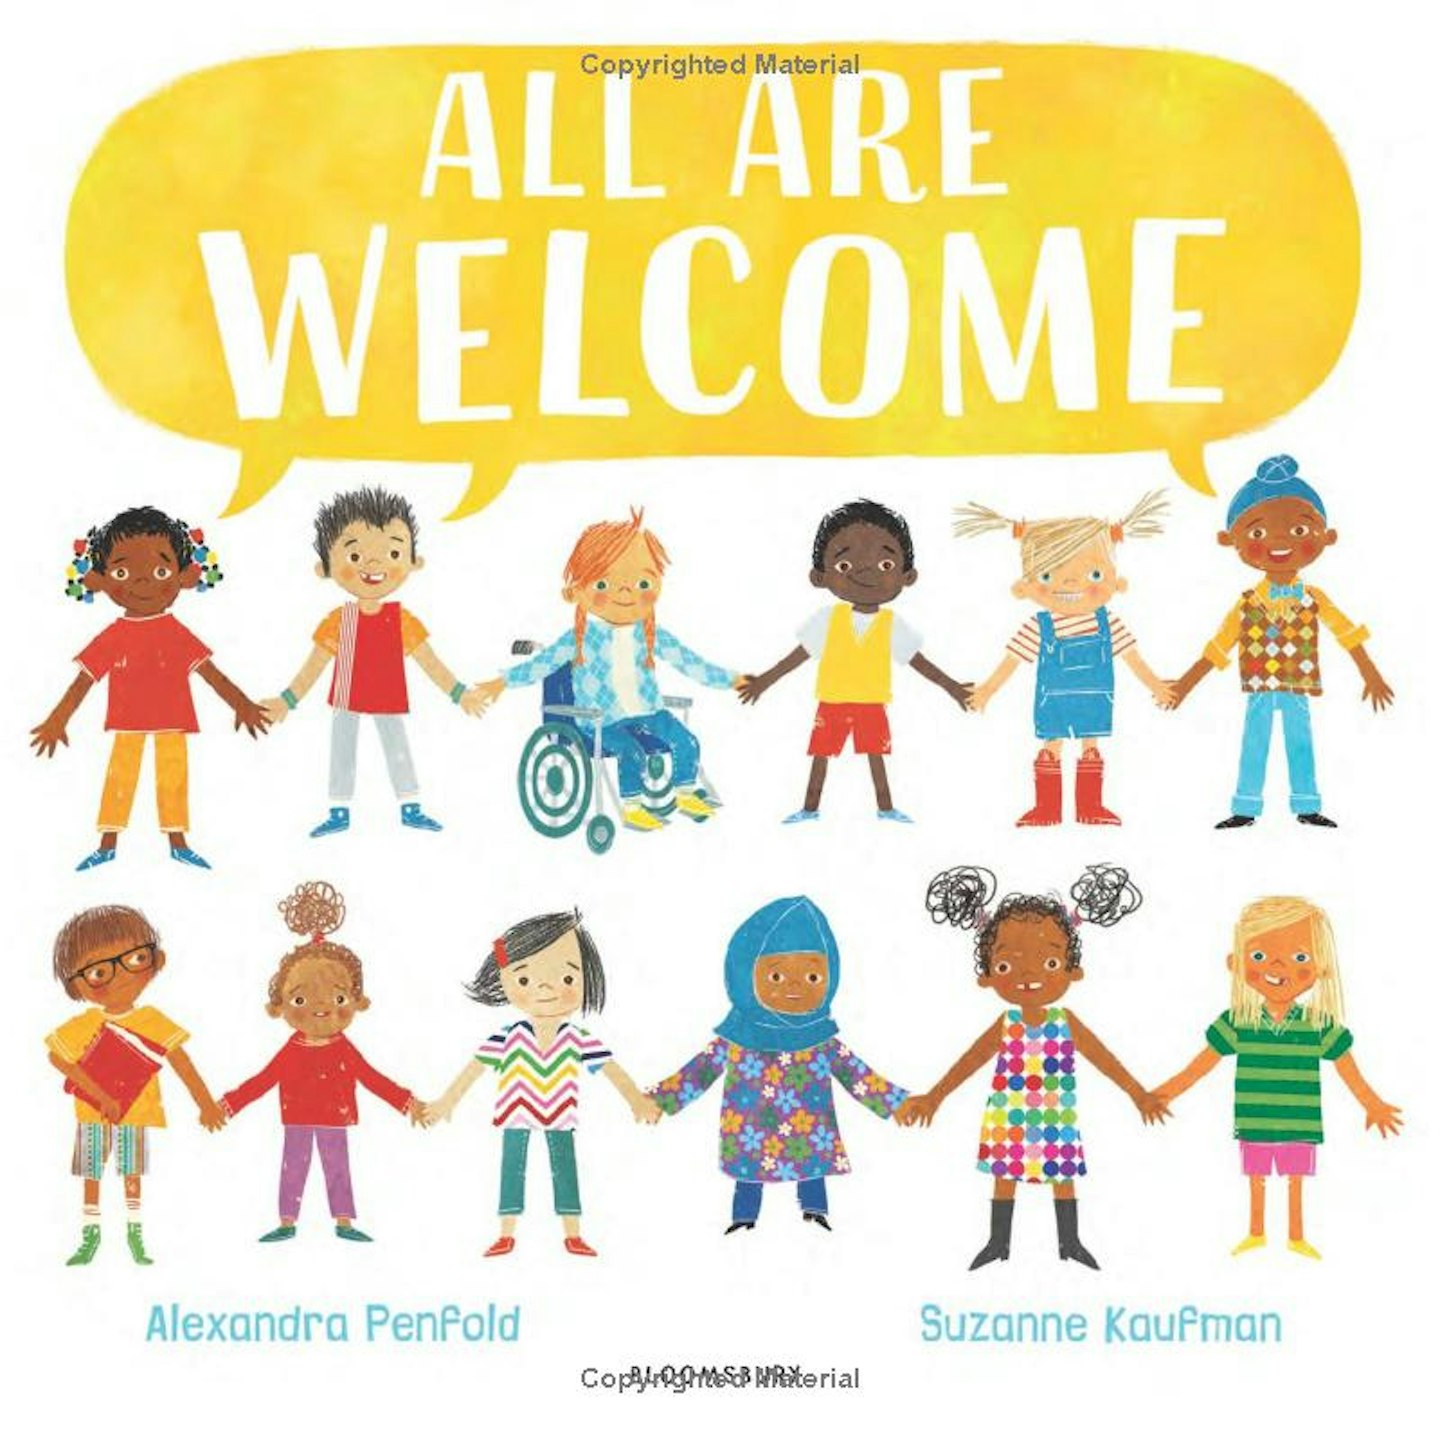 All Are Welcome by Alexandra Penfold and Suzanne Kaufman (2+, Fiction)